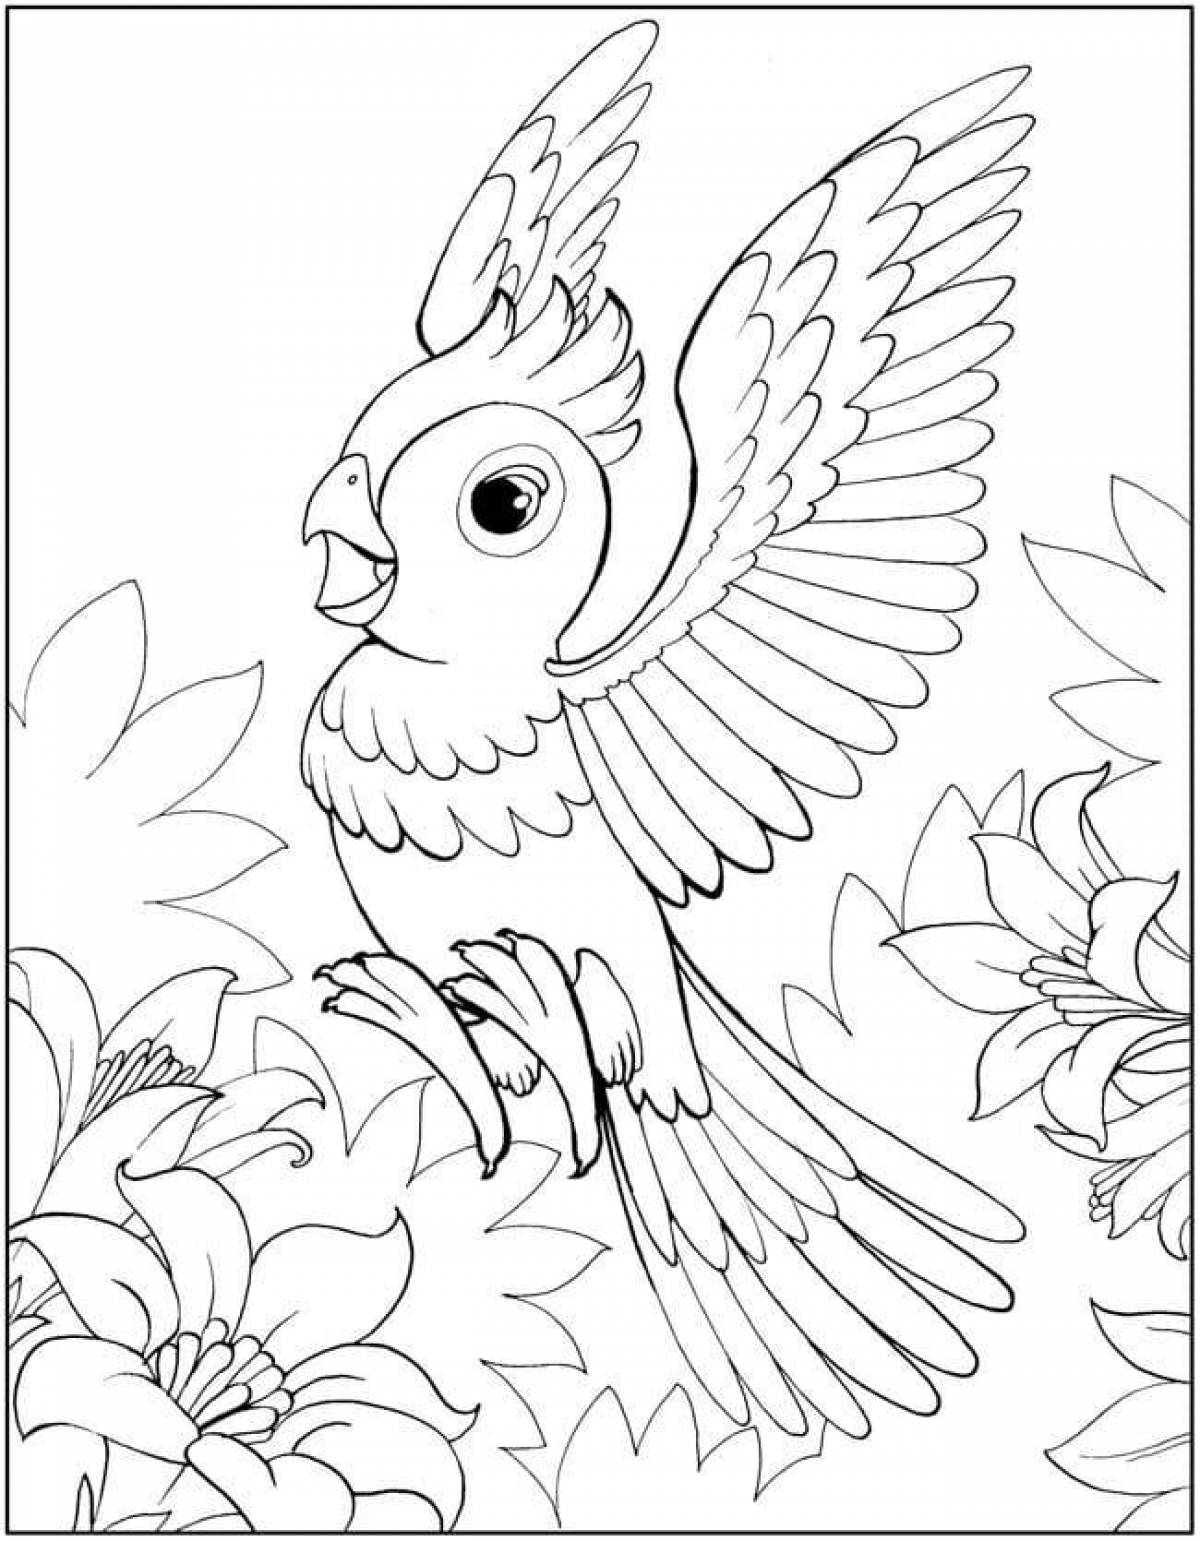 Wonderful parrot coloring book for kids